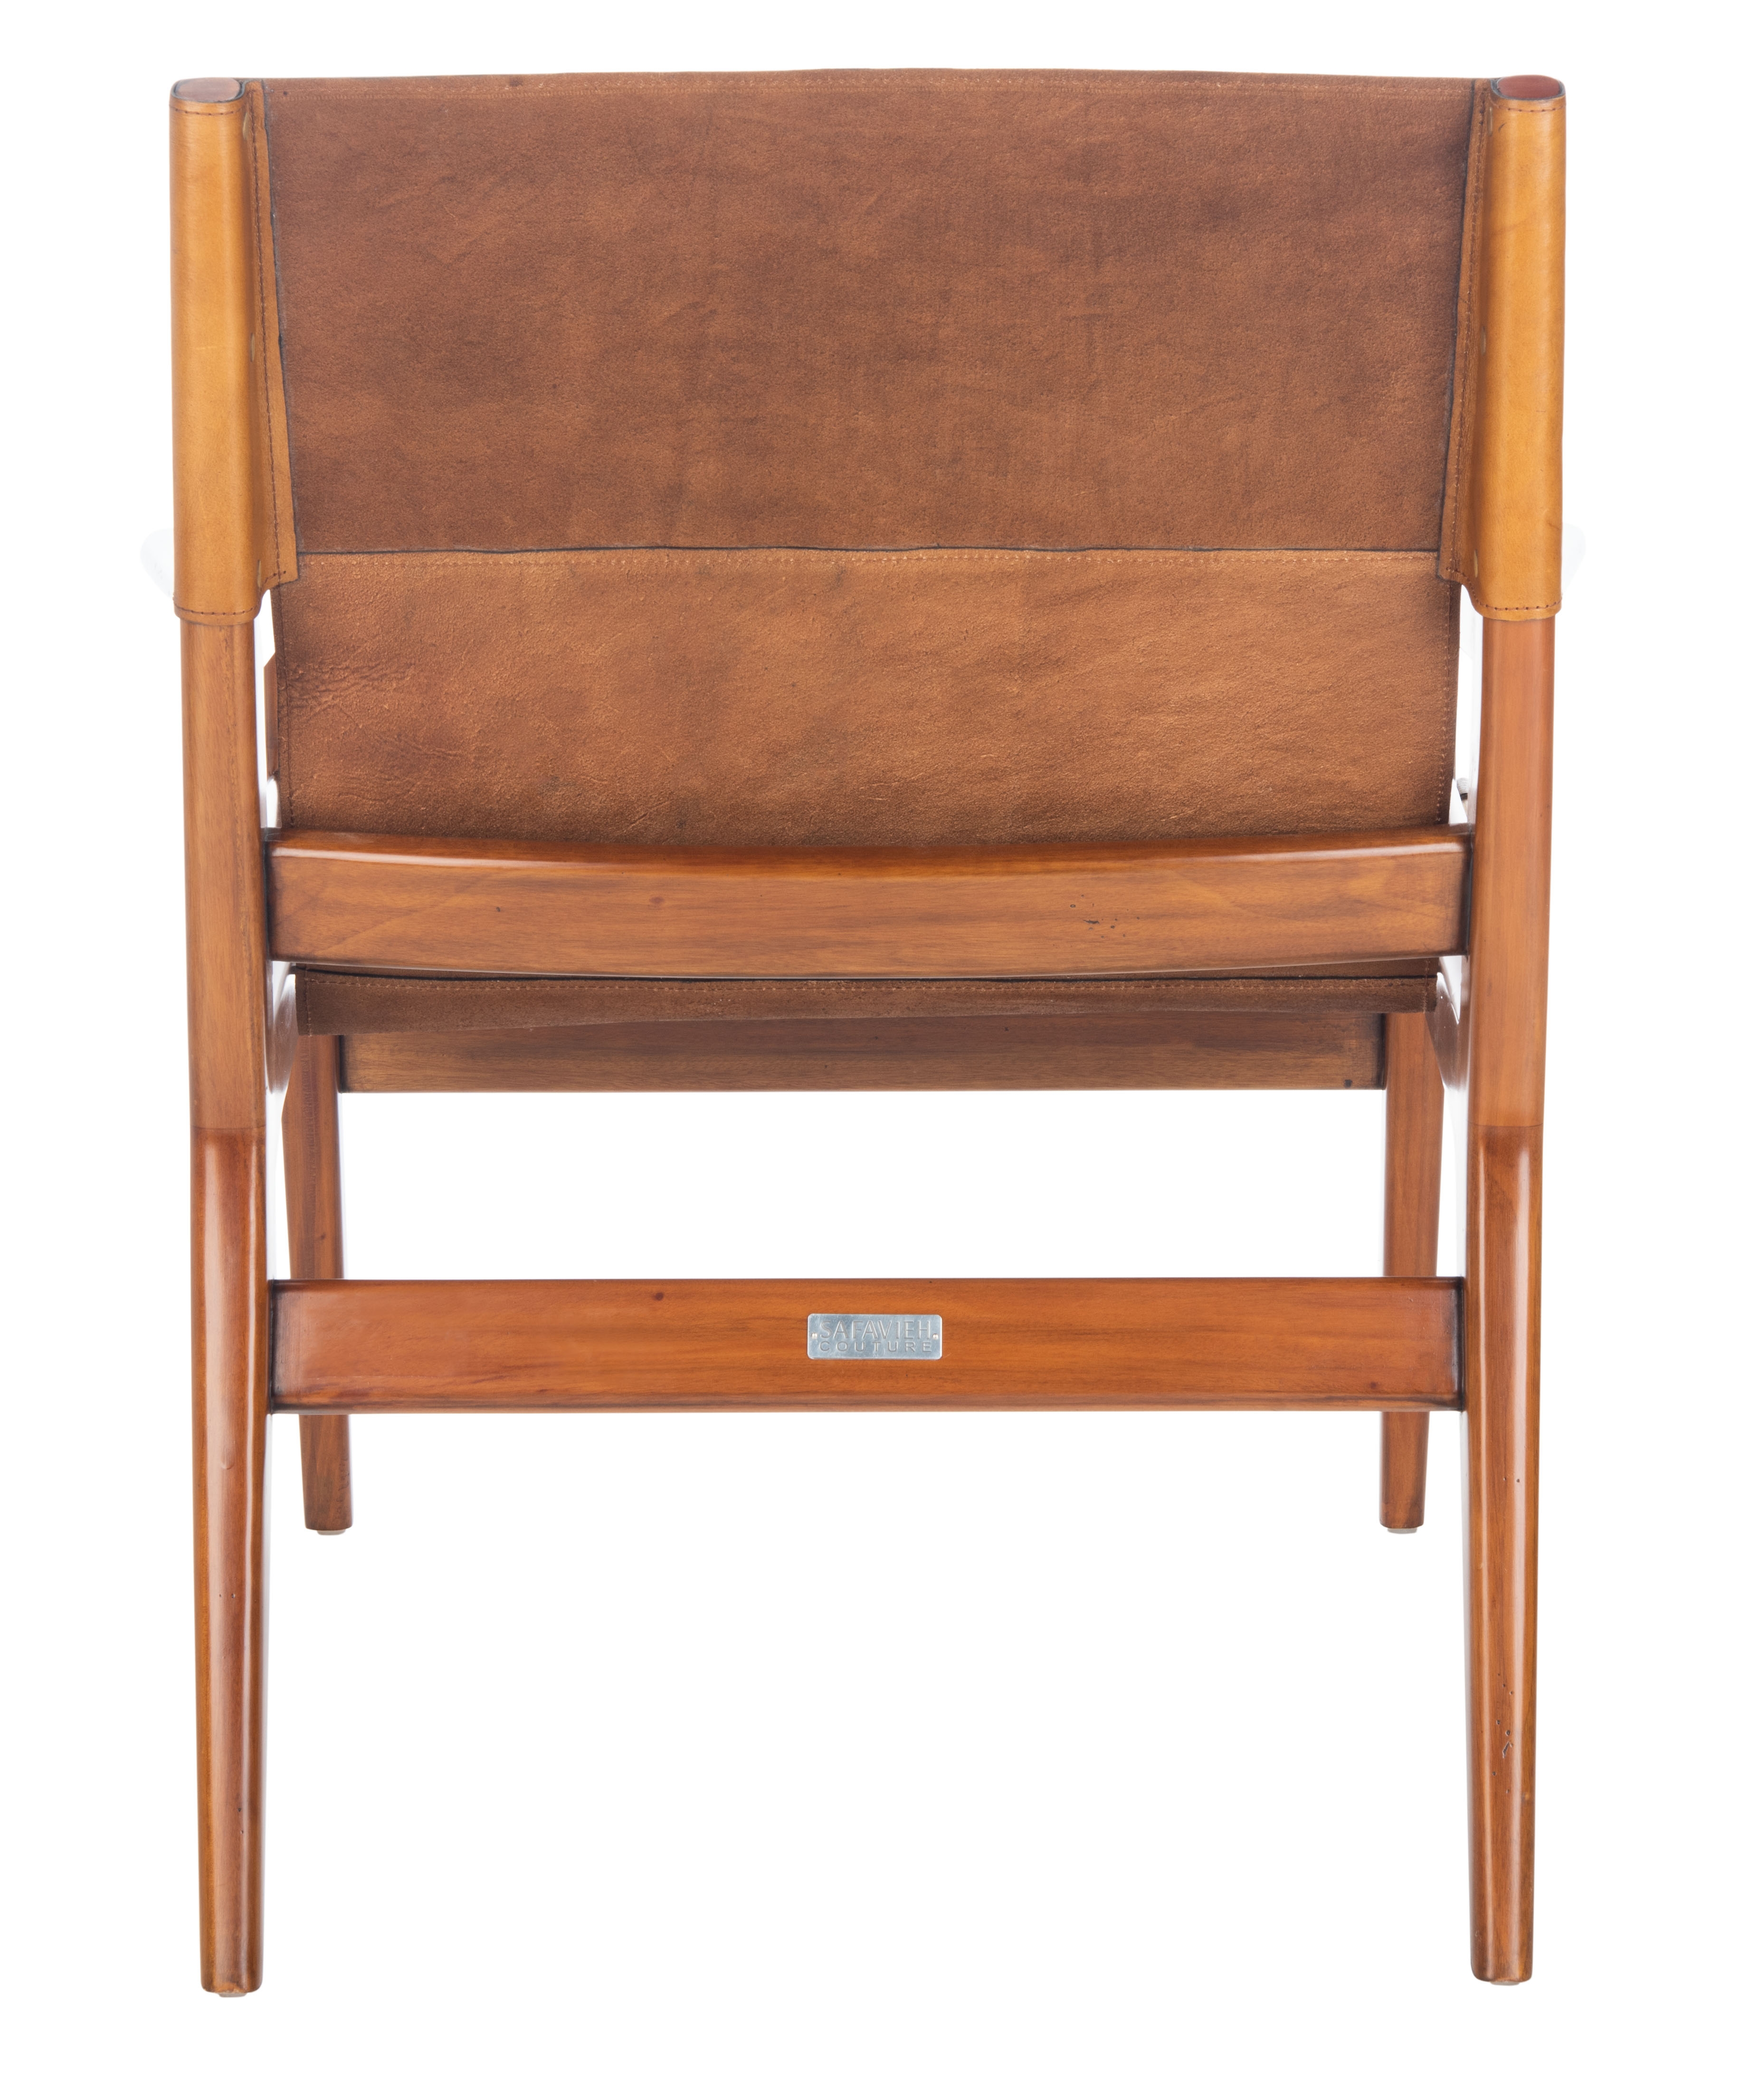 Culkin Leather Sling Chair - Brown - Arlo Home - Image 3